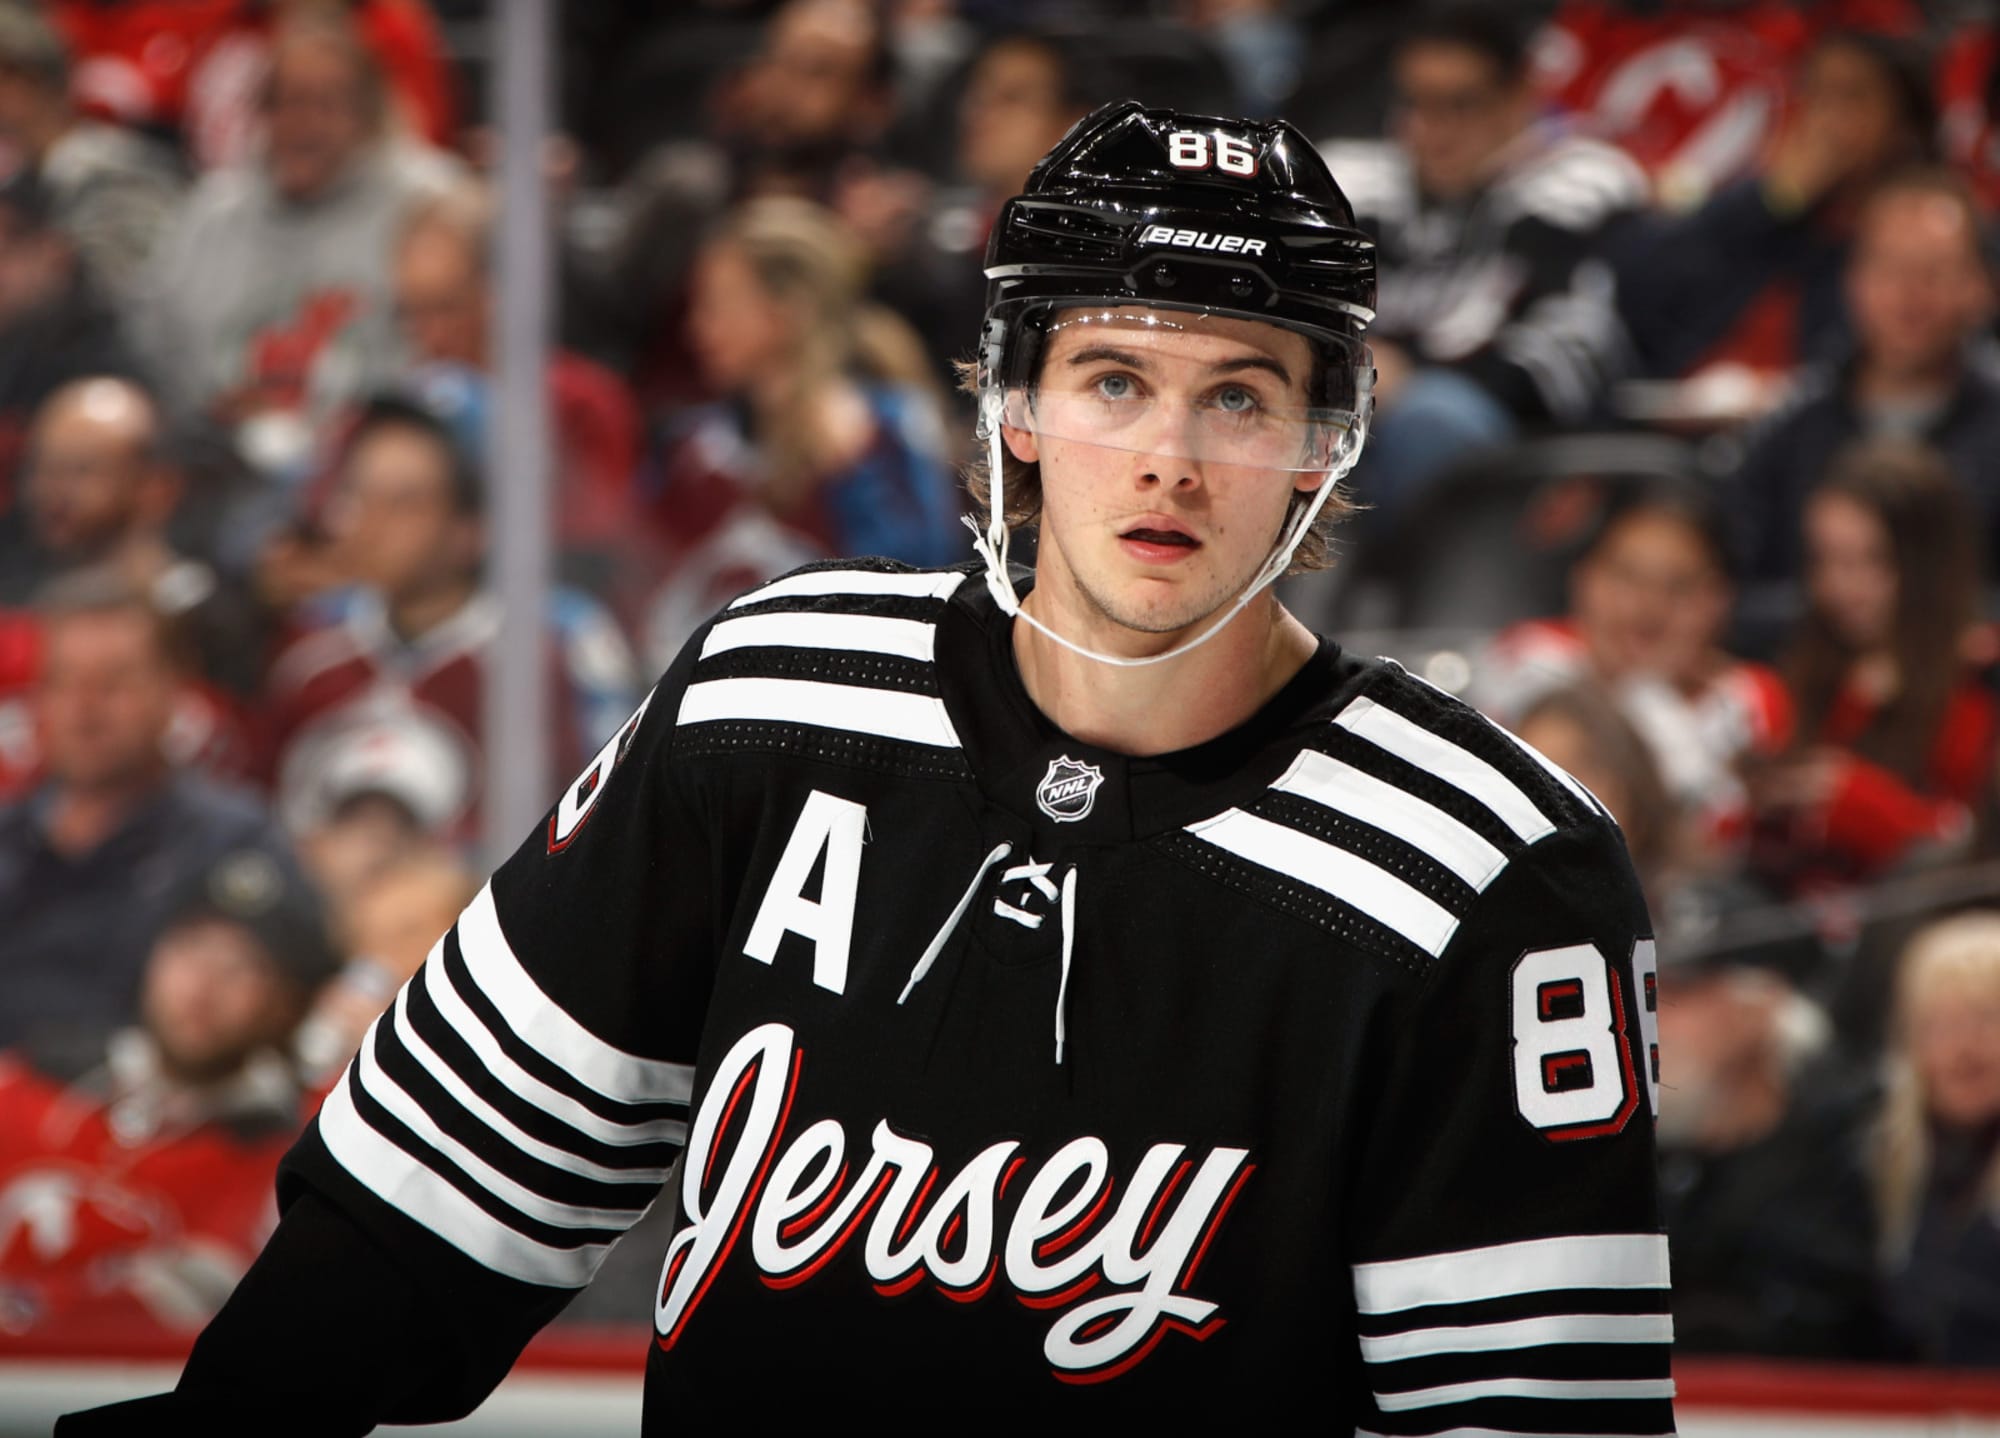 The young New Jersey Devils seem poised to make a Cup run behind Jack  Hughes and Nico Hischier - The San Diego Union-Tribune